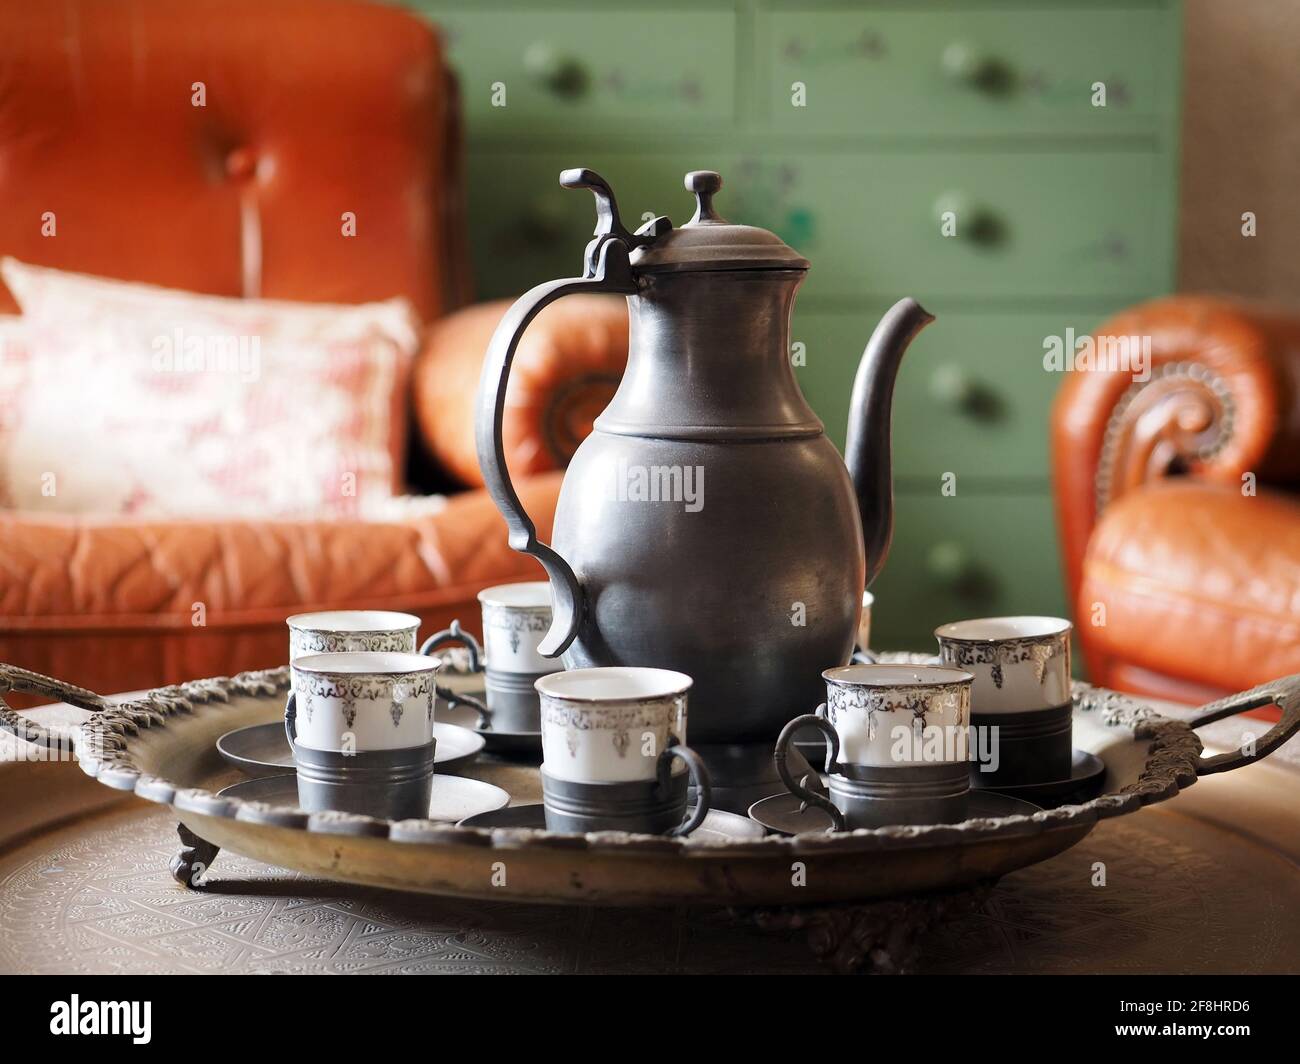 Vintage metal teapot (kettle) with many coffee/tea cups Stock Photo